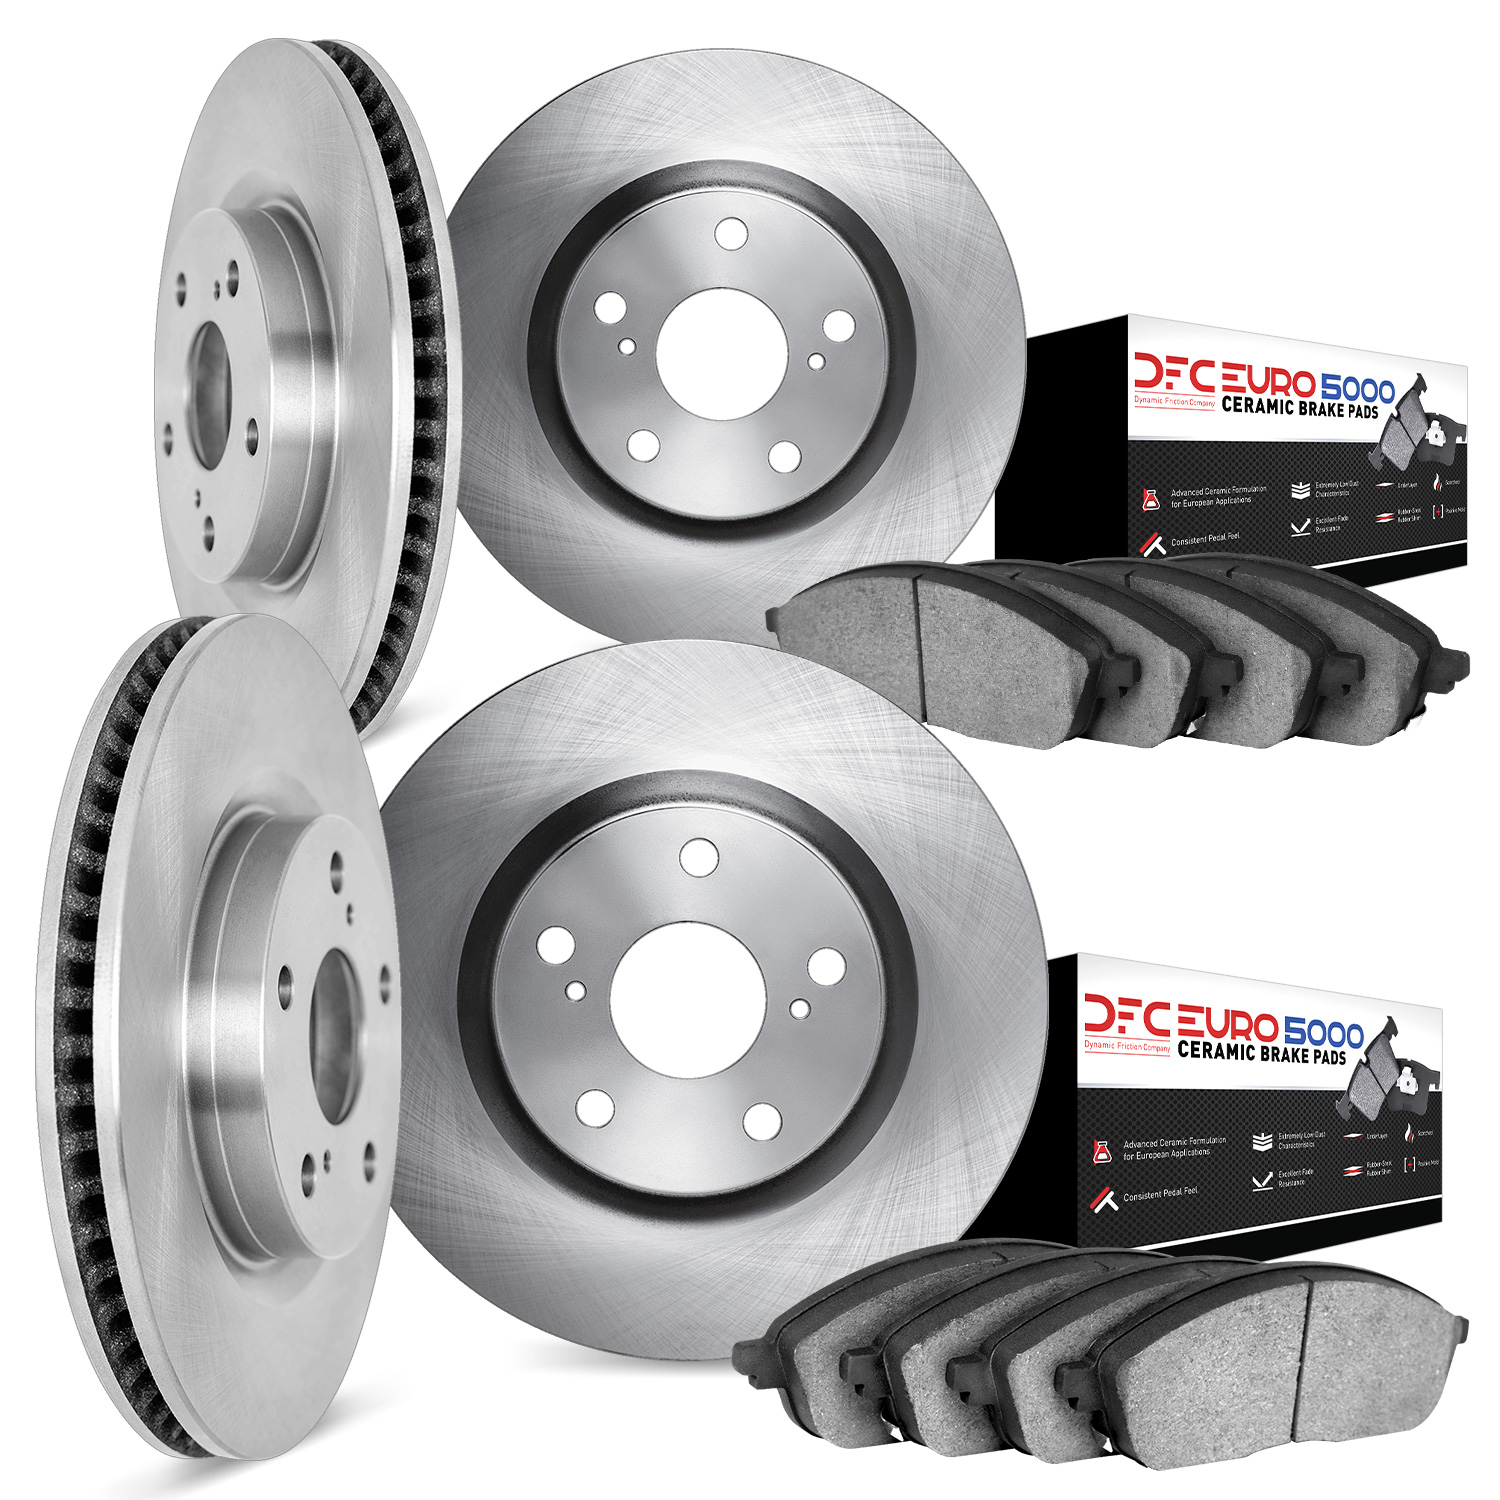 6604-31012 Brake Rotors w/5000 Euro Ceramic Brake Pads, 1995-2001 BMW, Position: Front and Rear